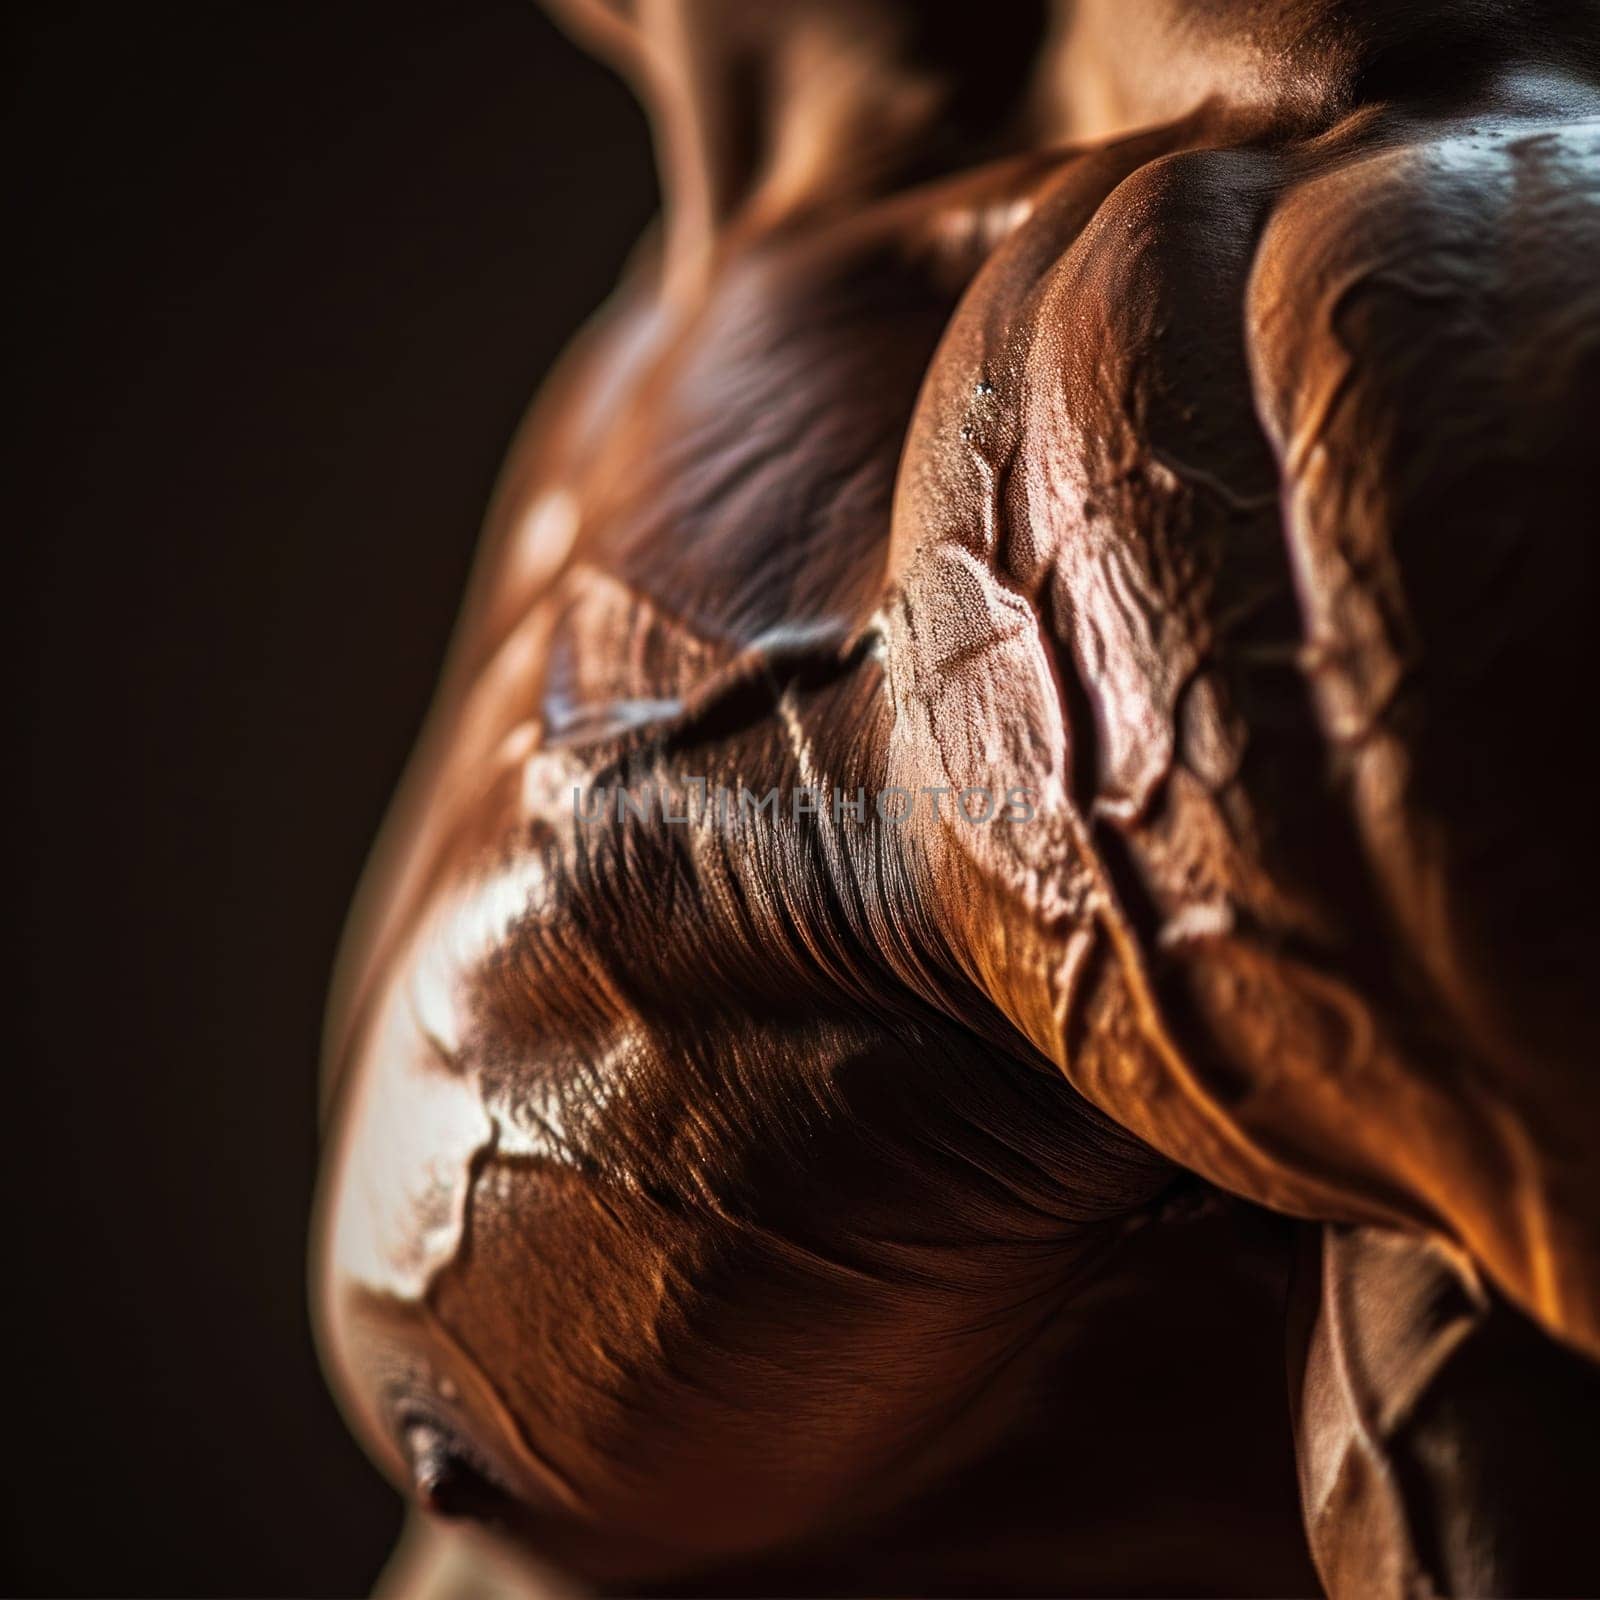 A close up of a bodybuilde's chest and back